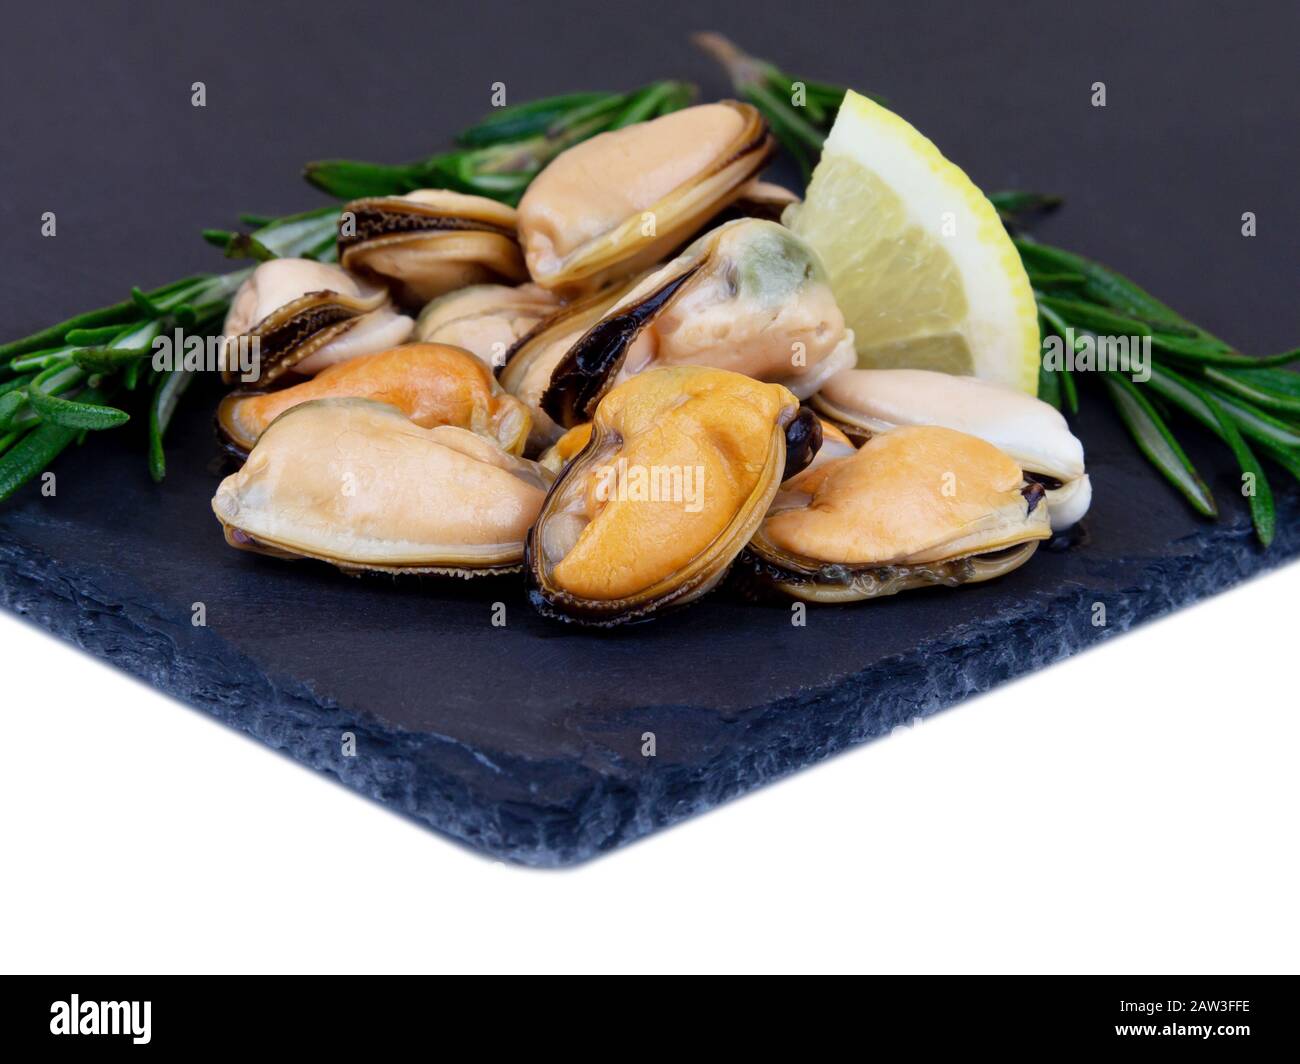 Mussels in oil and spices food background copy space. Stock Photo